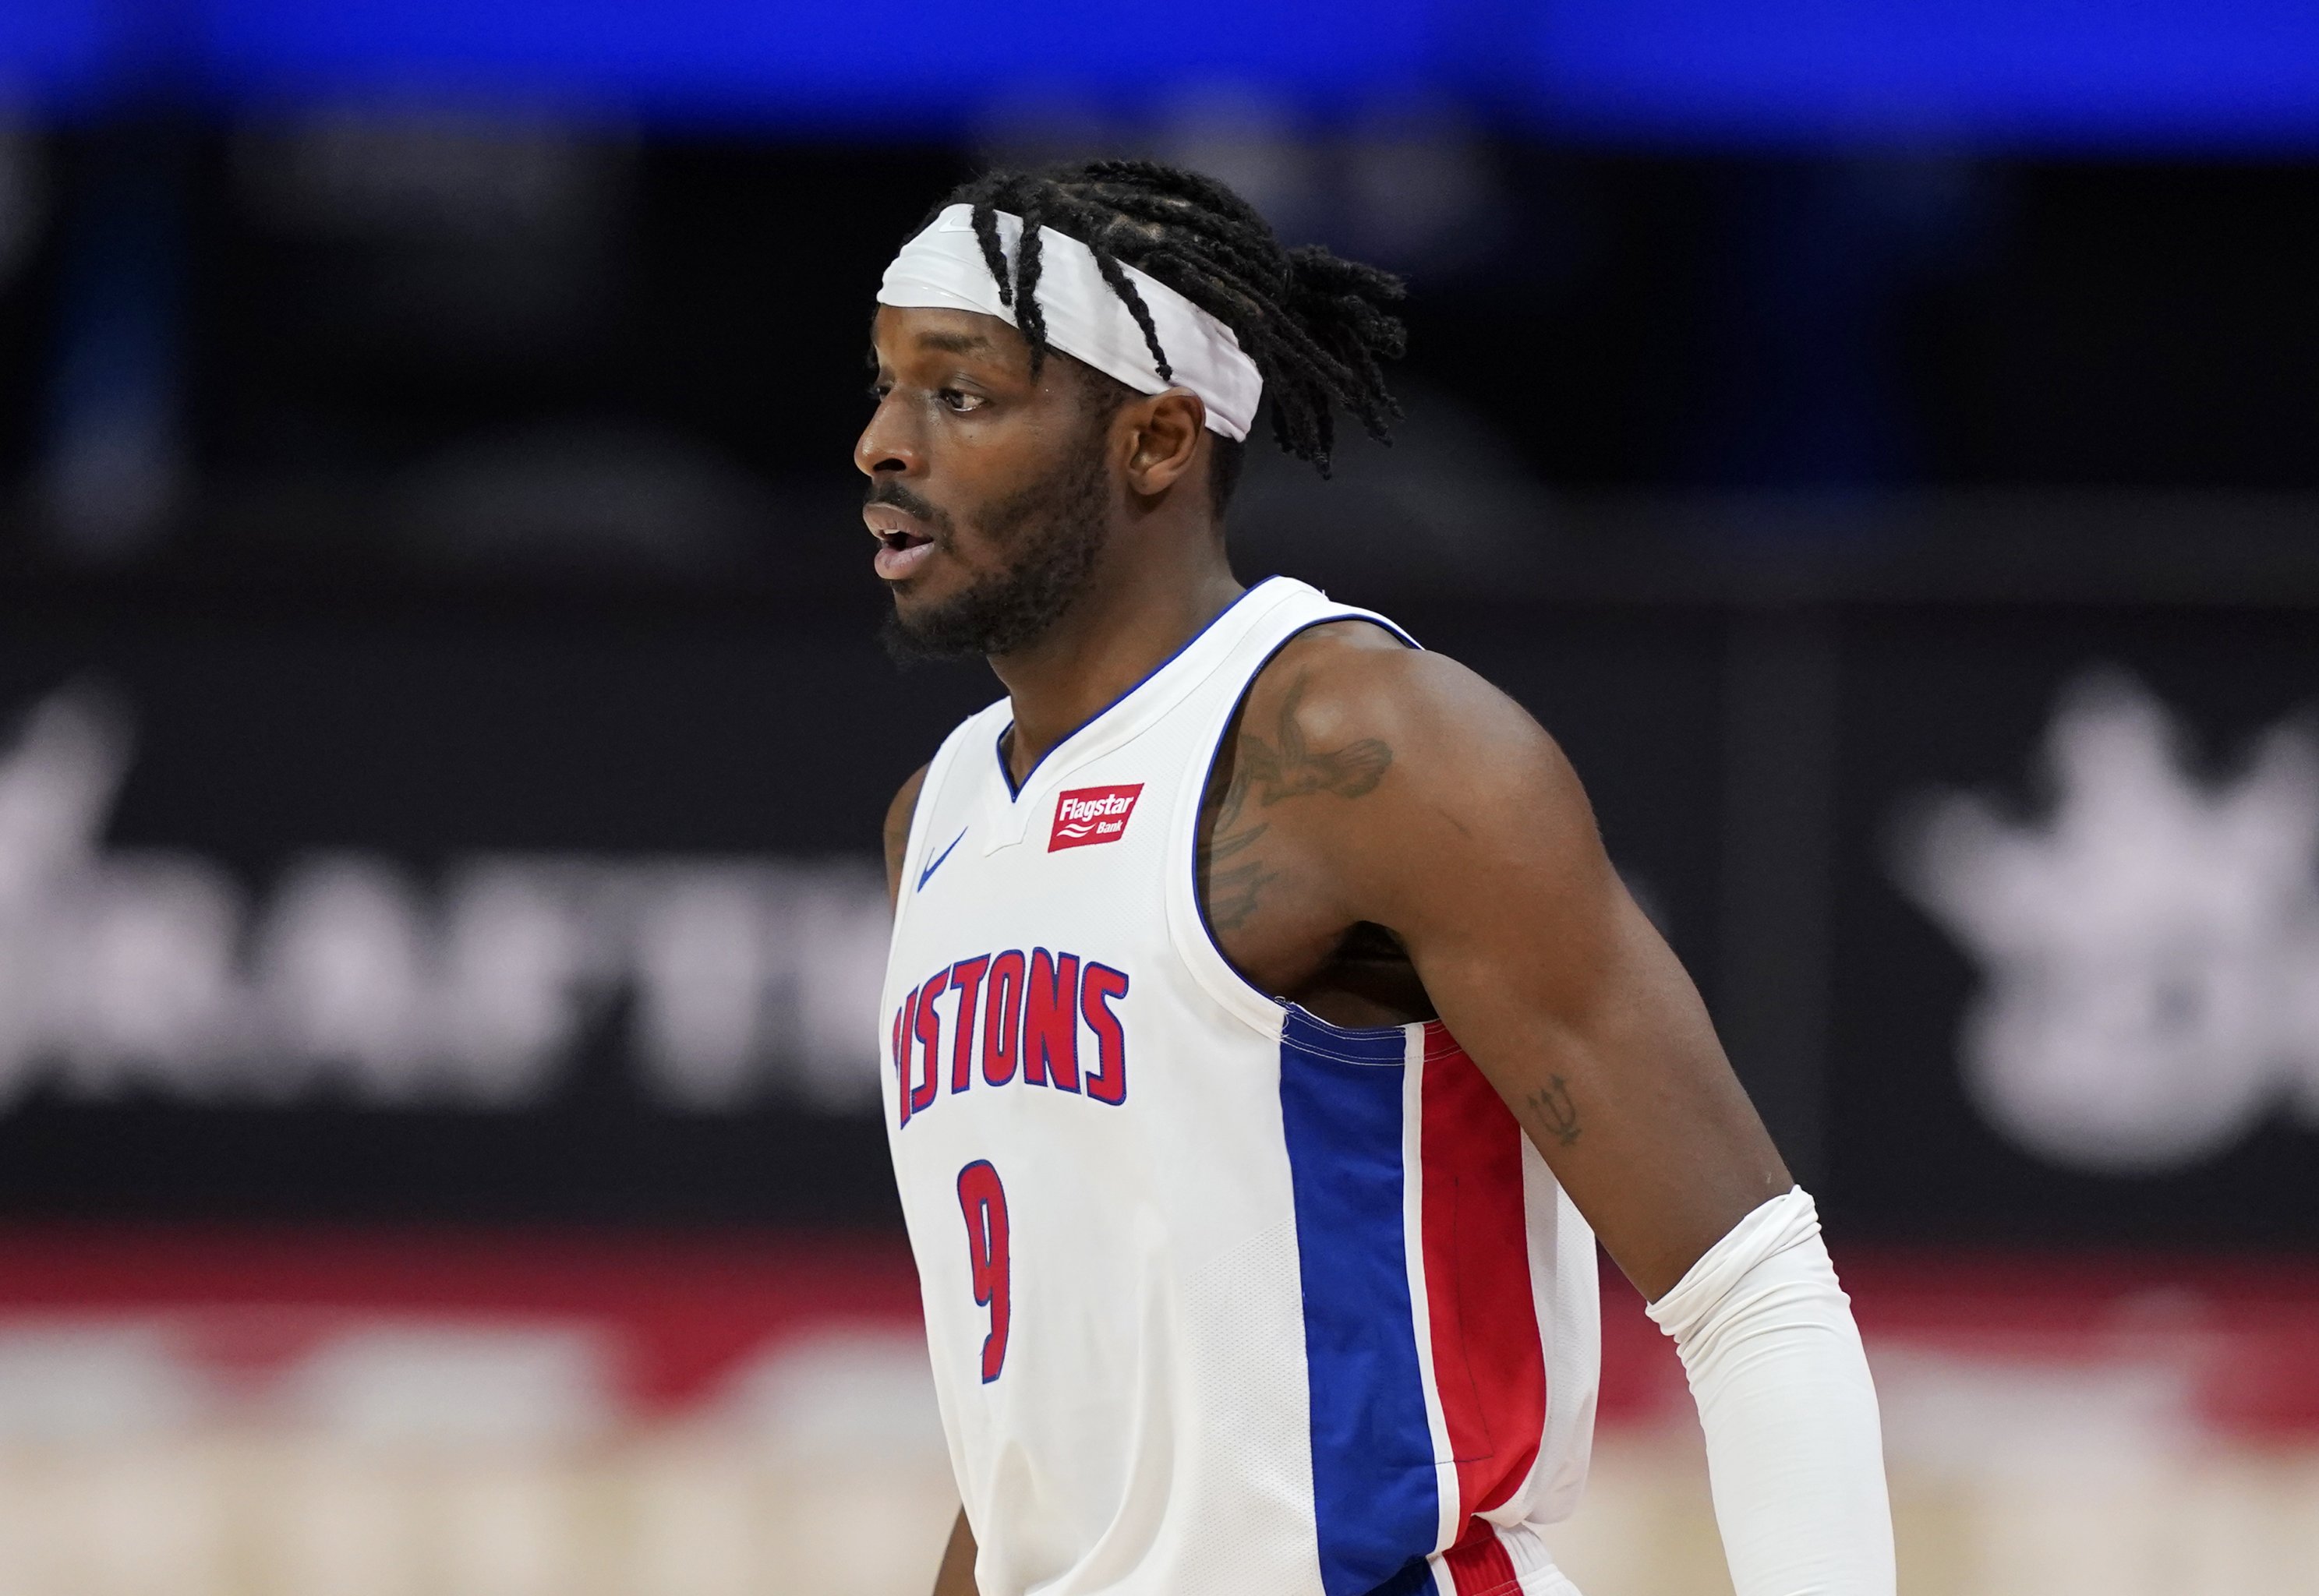 Report: Detroit Pistons become latest team with jersey ad deal, link up  with Flagstar Bank - NBC Sports